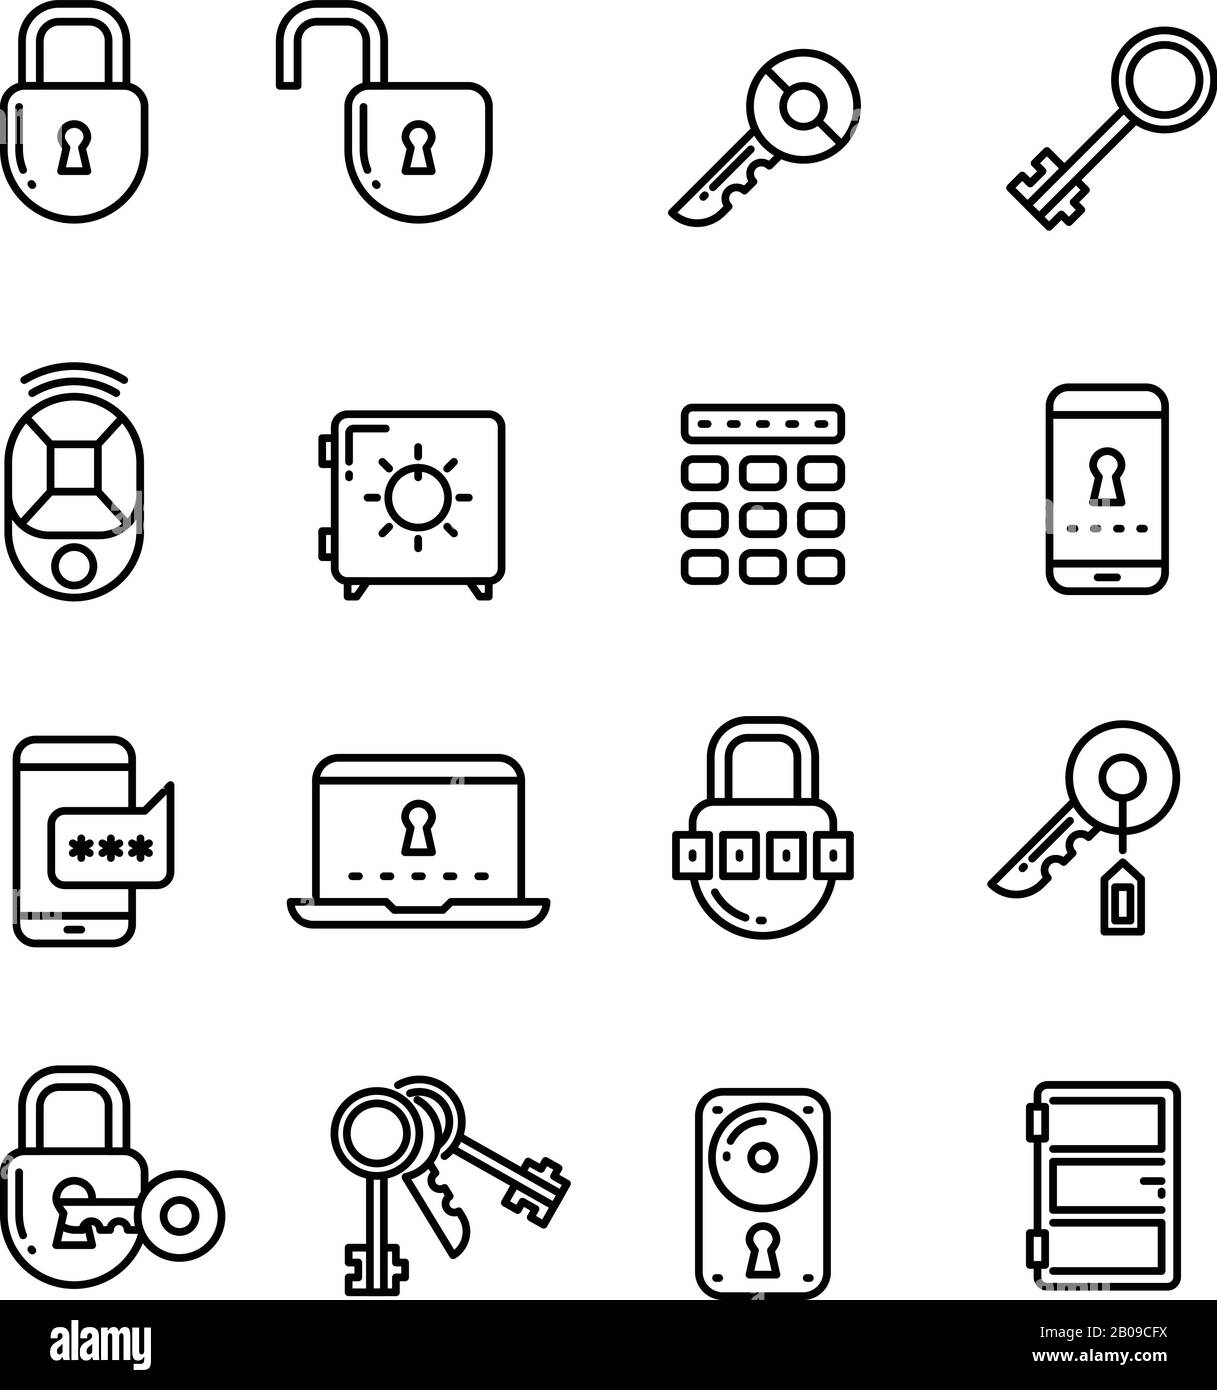 Key, lock, padlock, safe, door, security thin line vector icons. Collection of linear security icons, illustration of lock and code for security Stock Vector